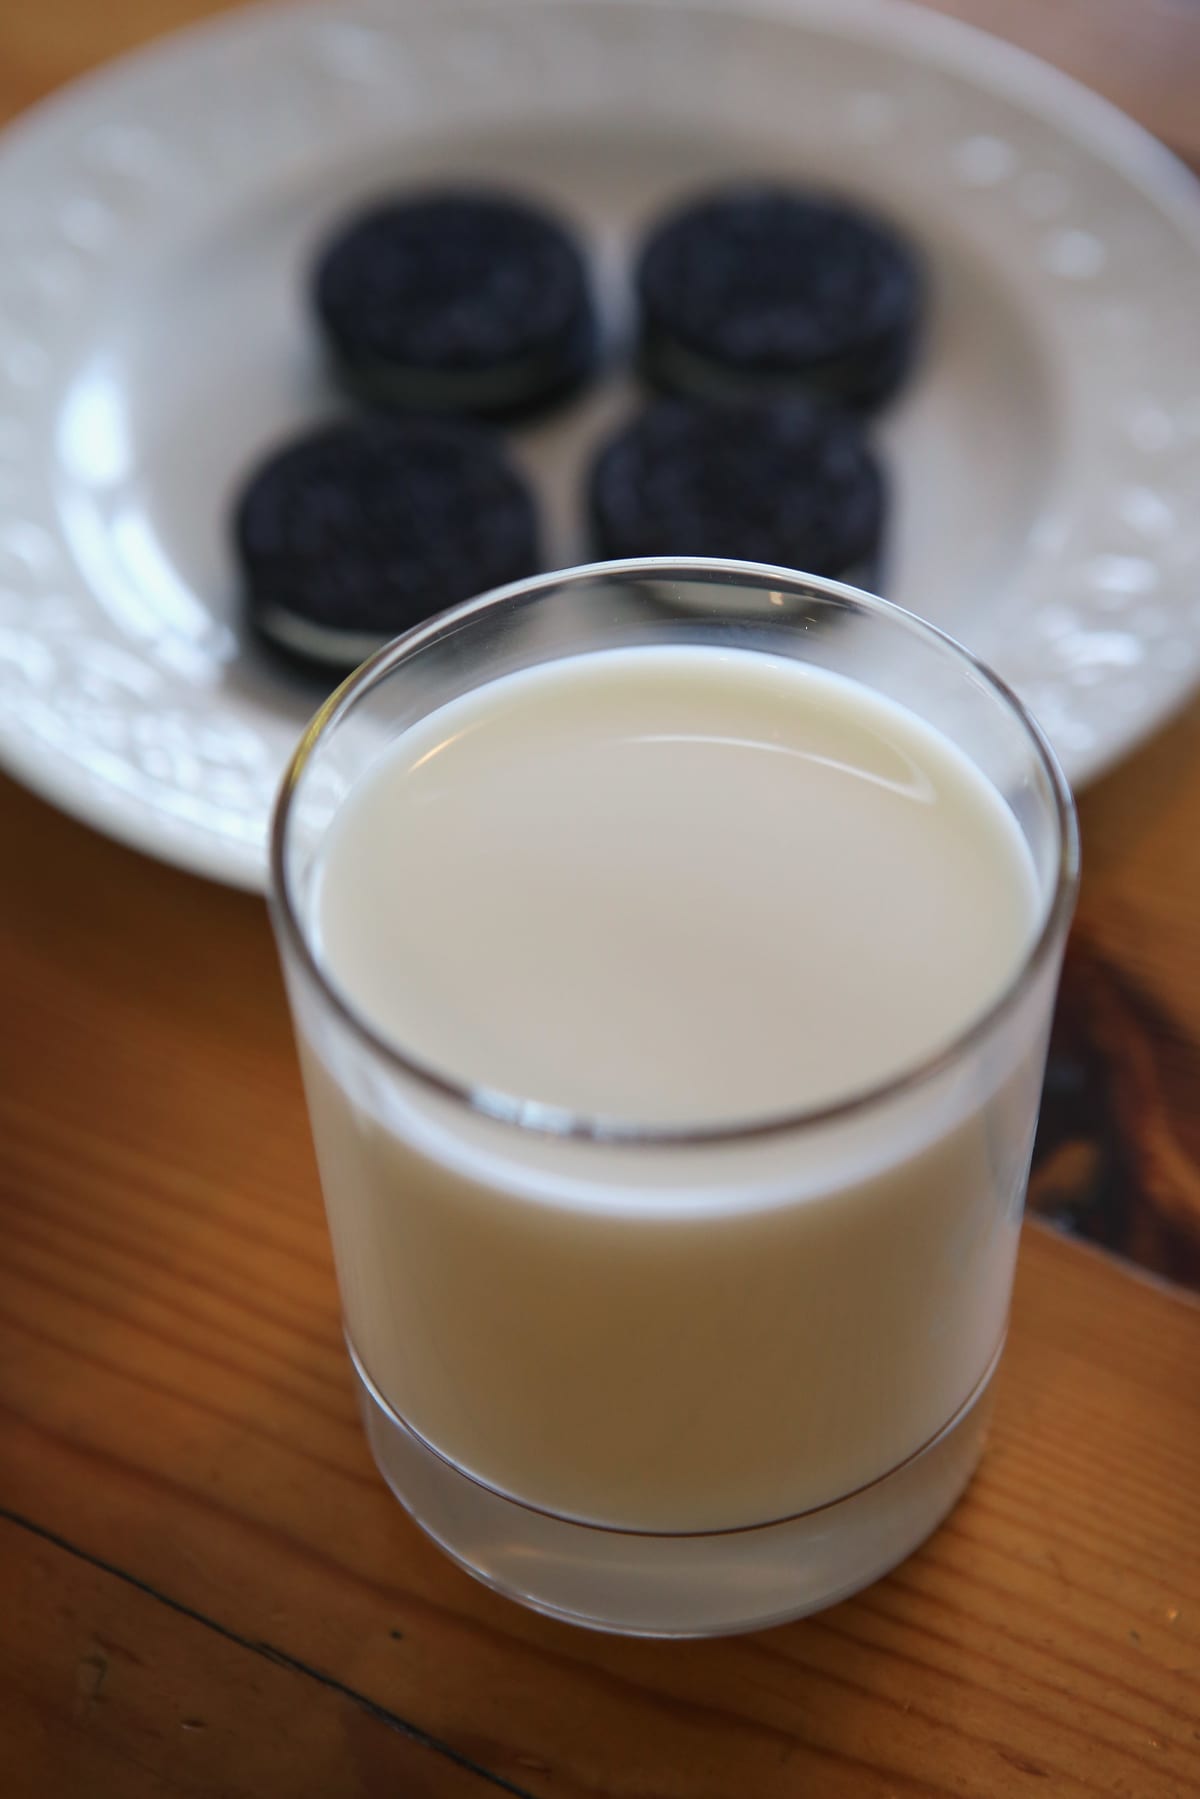 Glass of milk on a wooden table